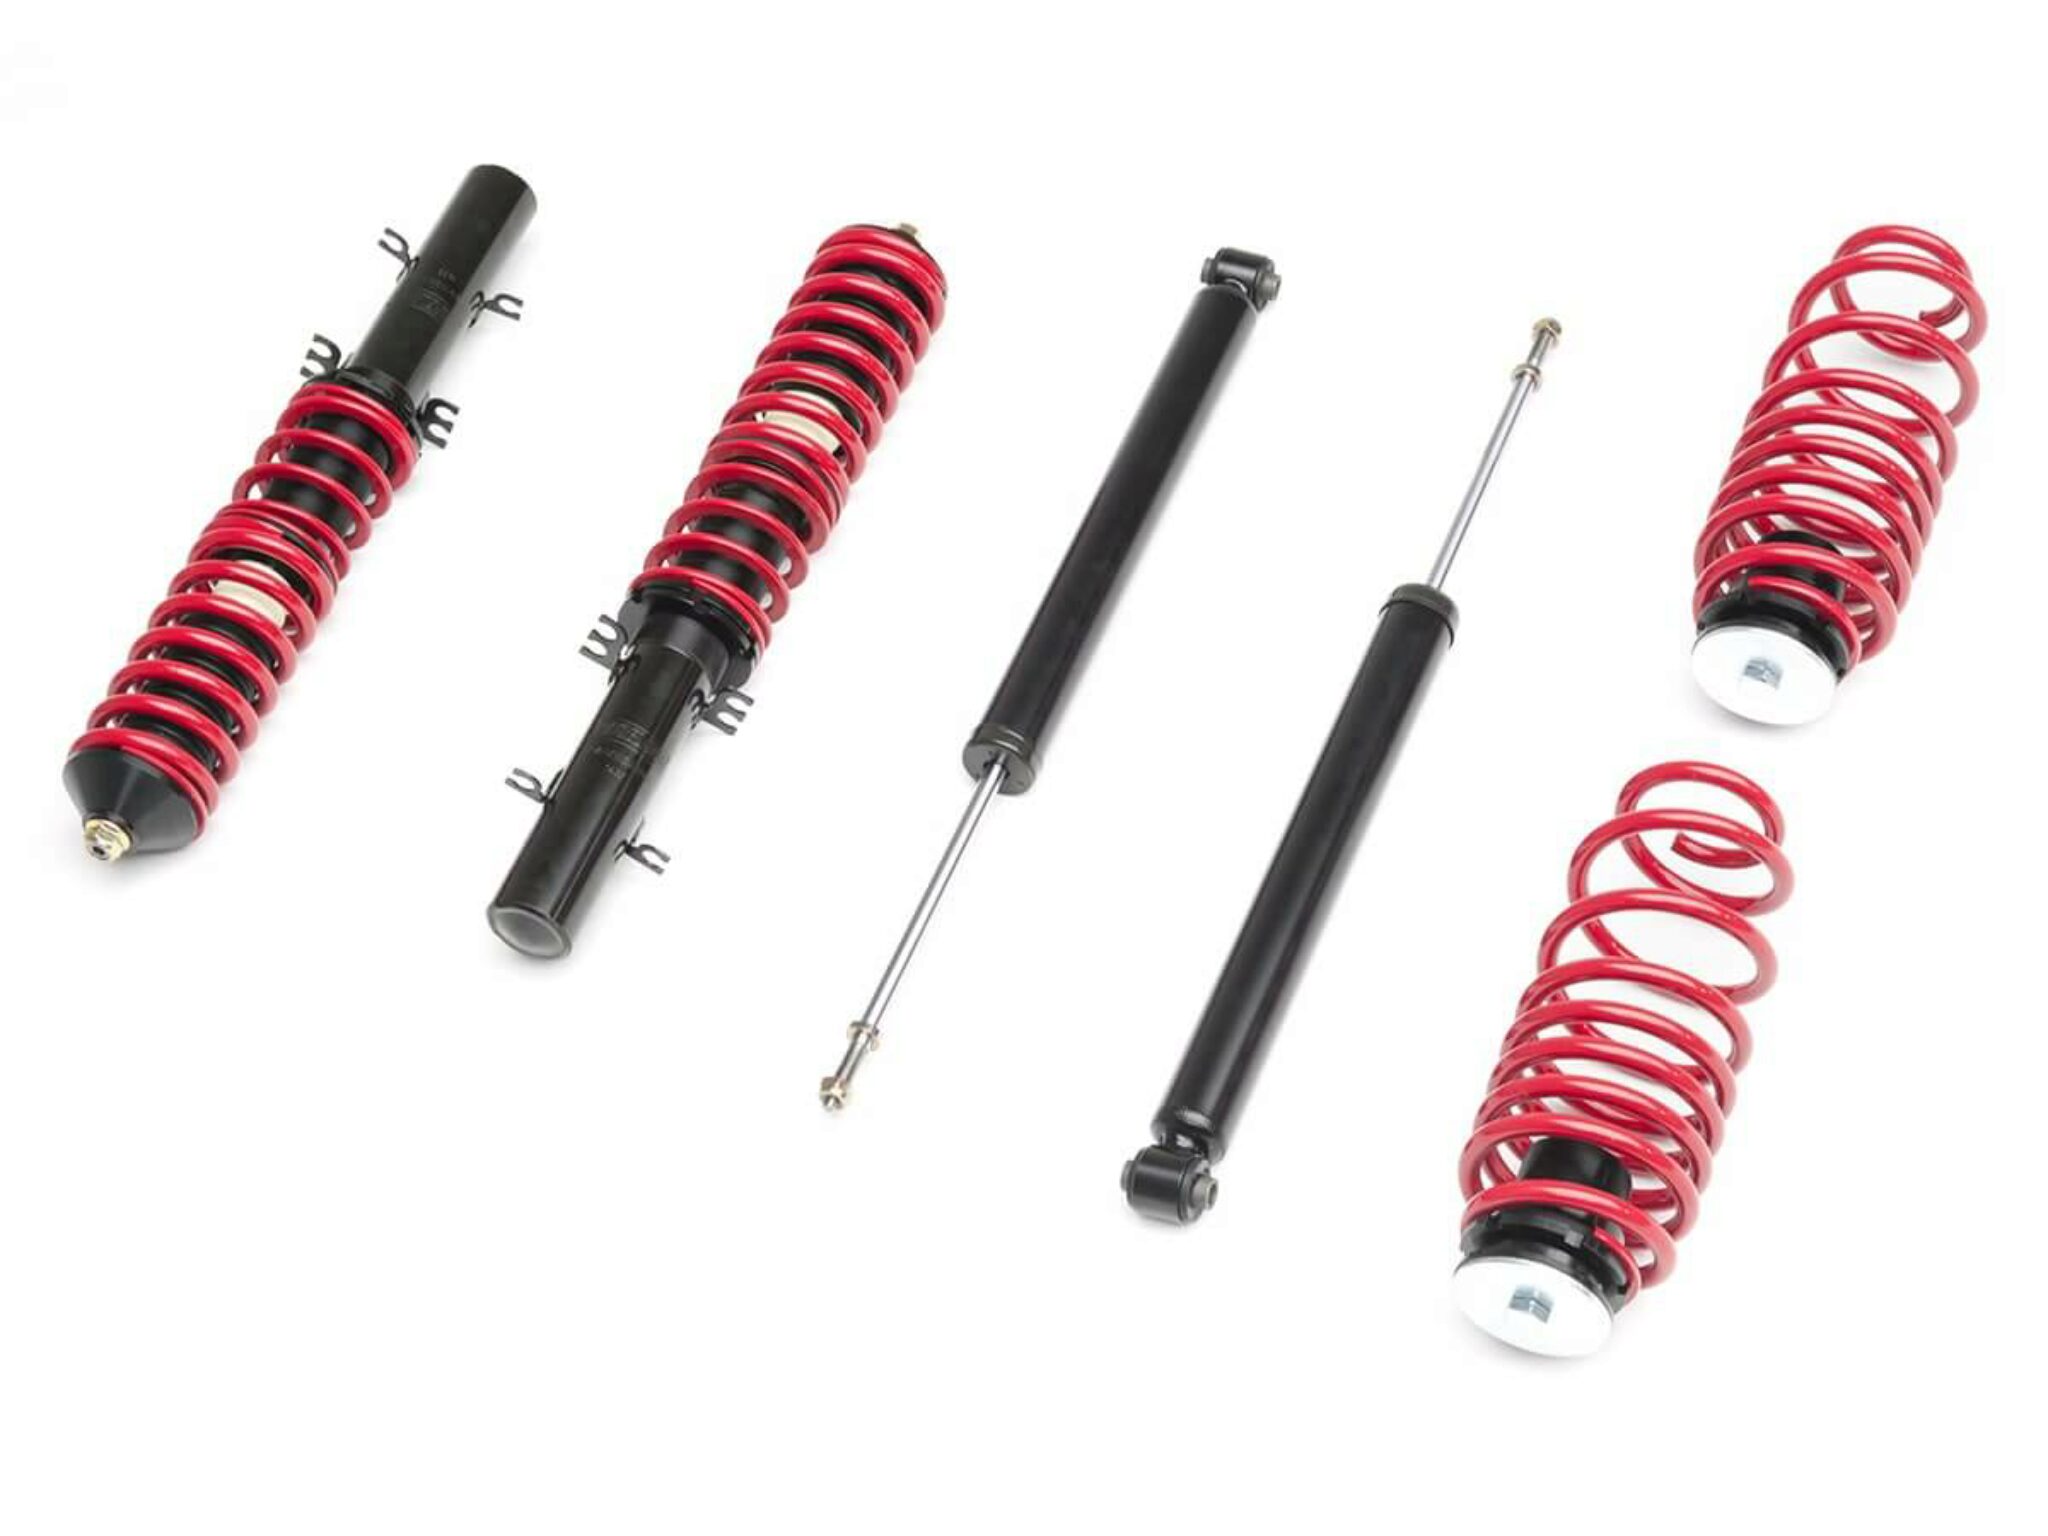 Raceland Coilovers Review Zijn Raceland Coilovers Goed?